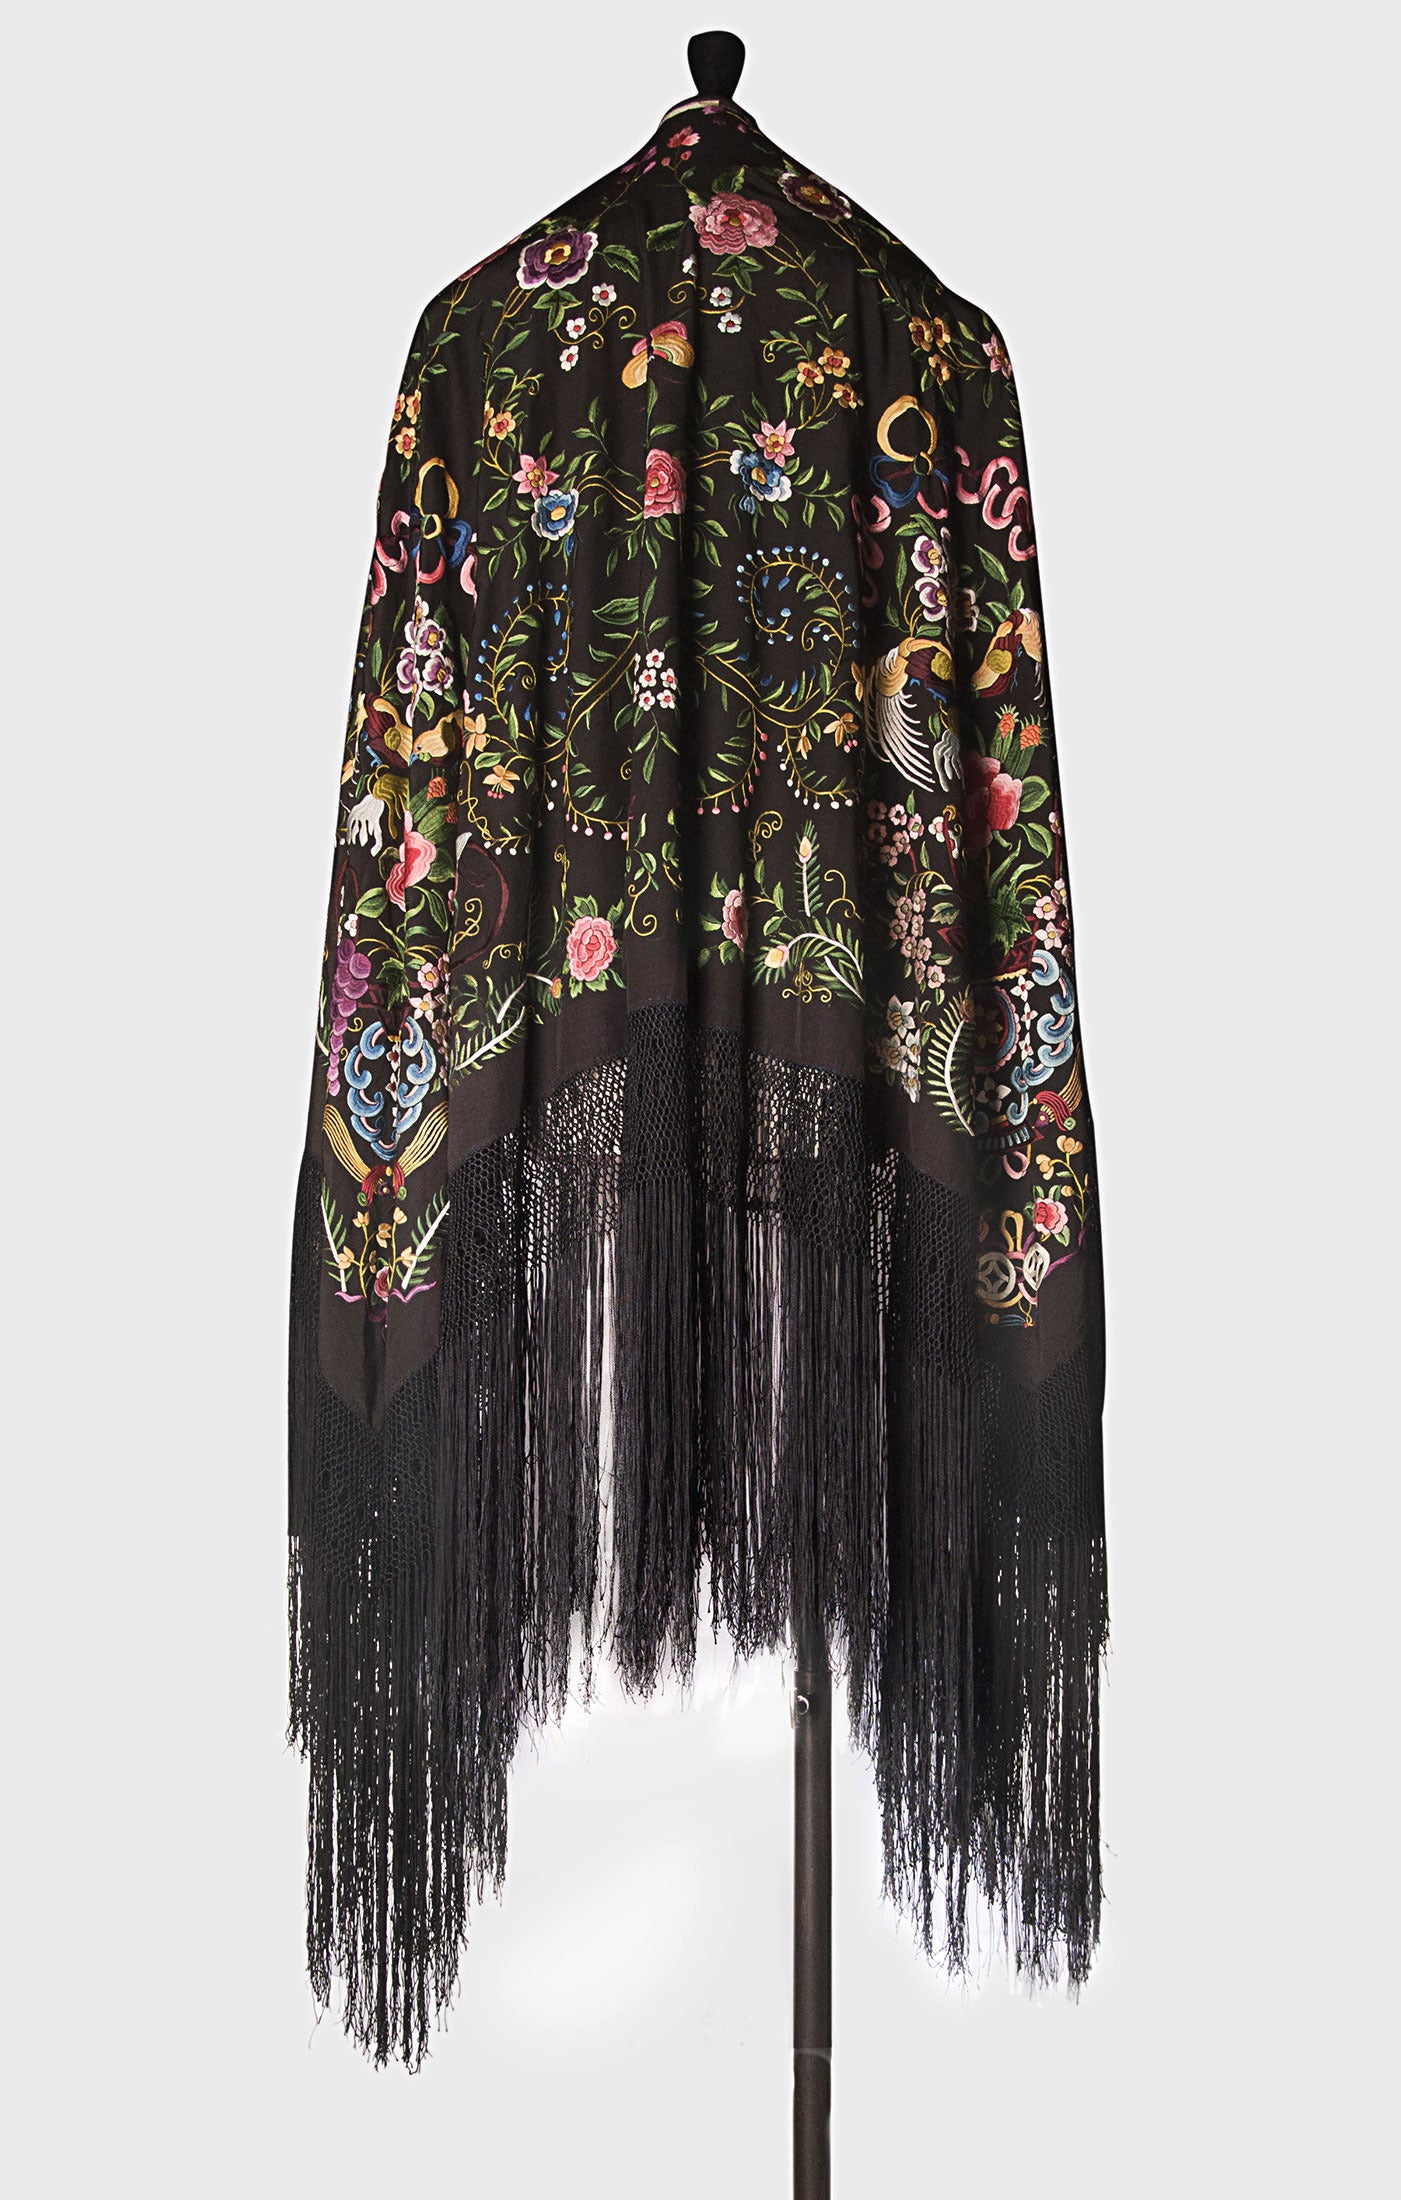 Spectacular Hand Embroidered Multicolored "Manila" Shawl For Sale